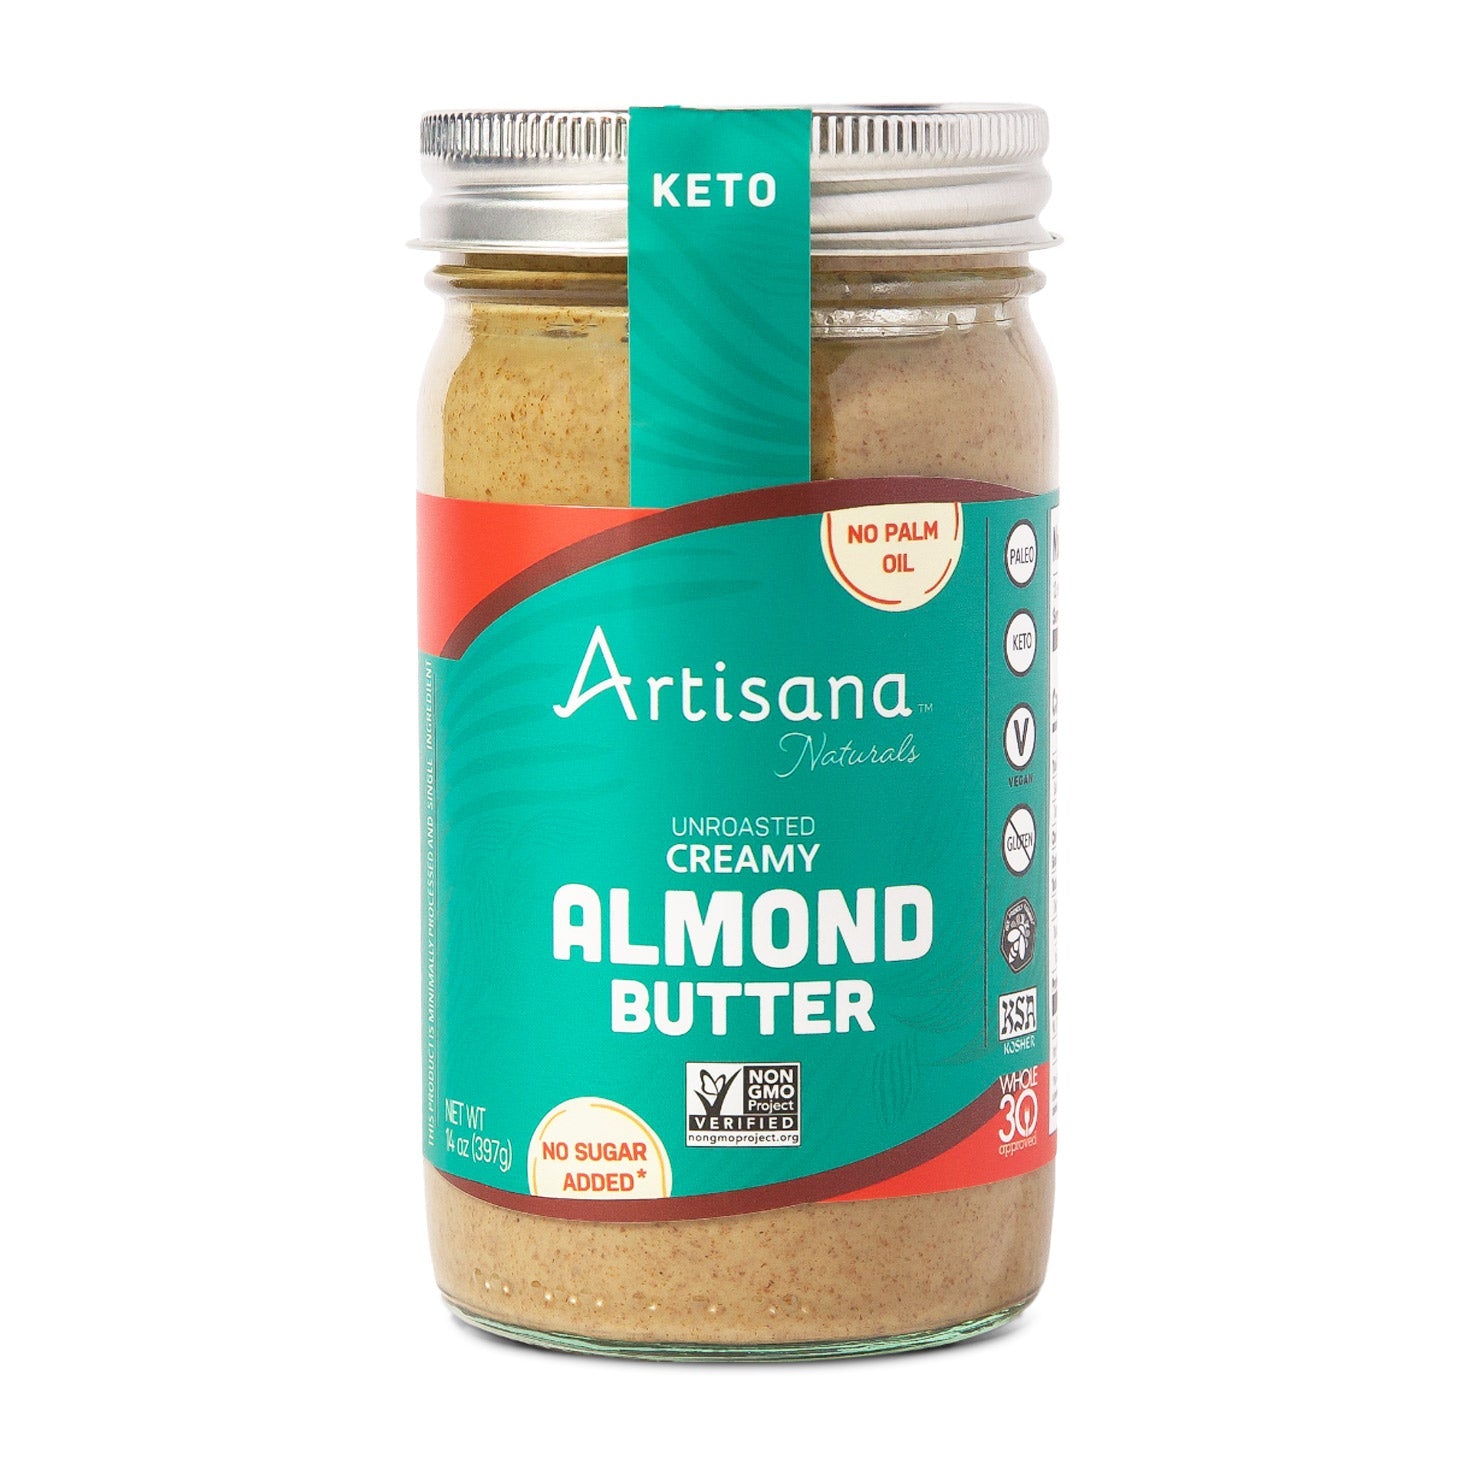 Unroasted Creamy Almond Butter